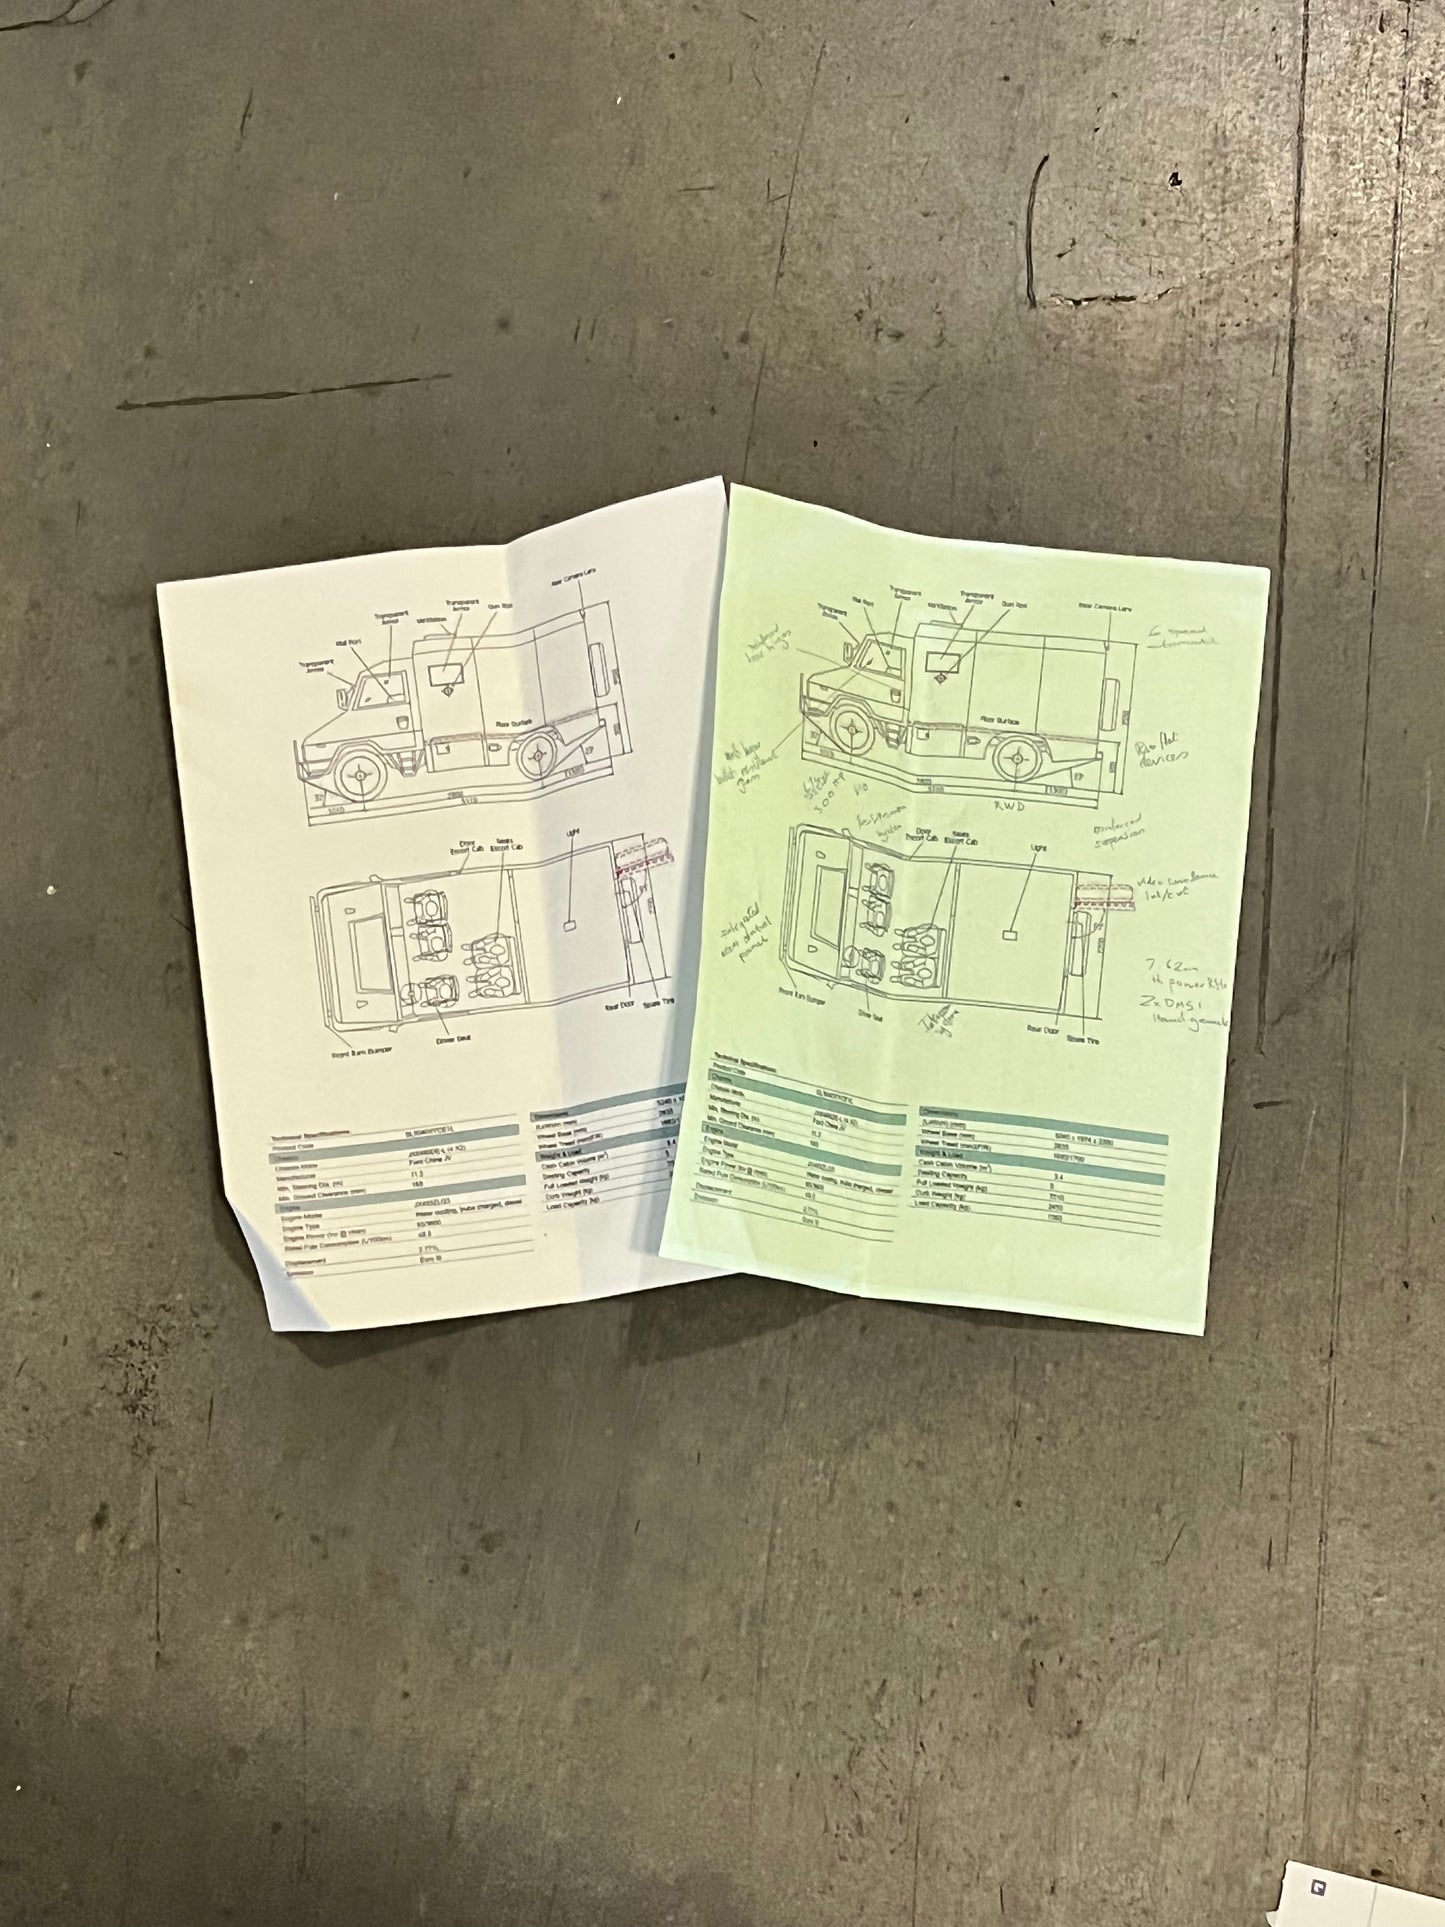 WRATH OF MAN: “H” Bank Heist Truck Blueprints and Bomb Drawing